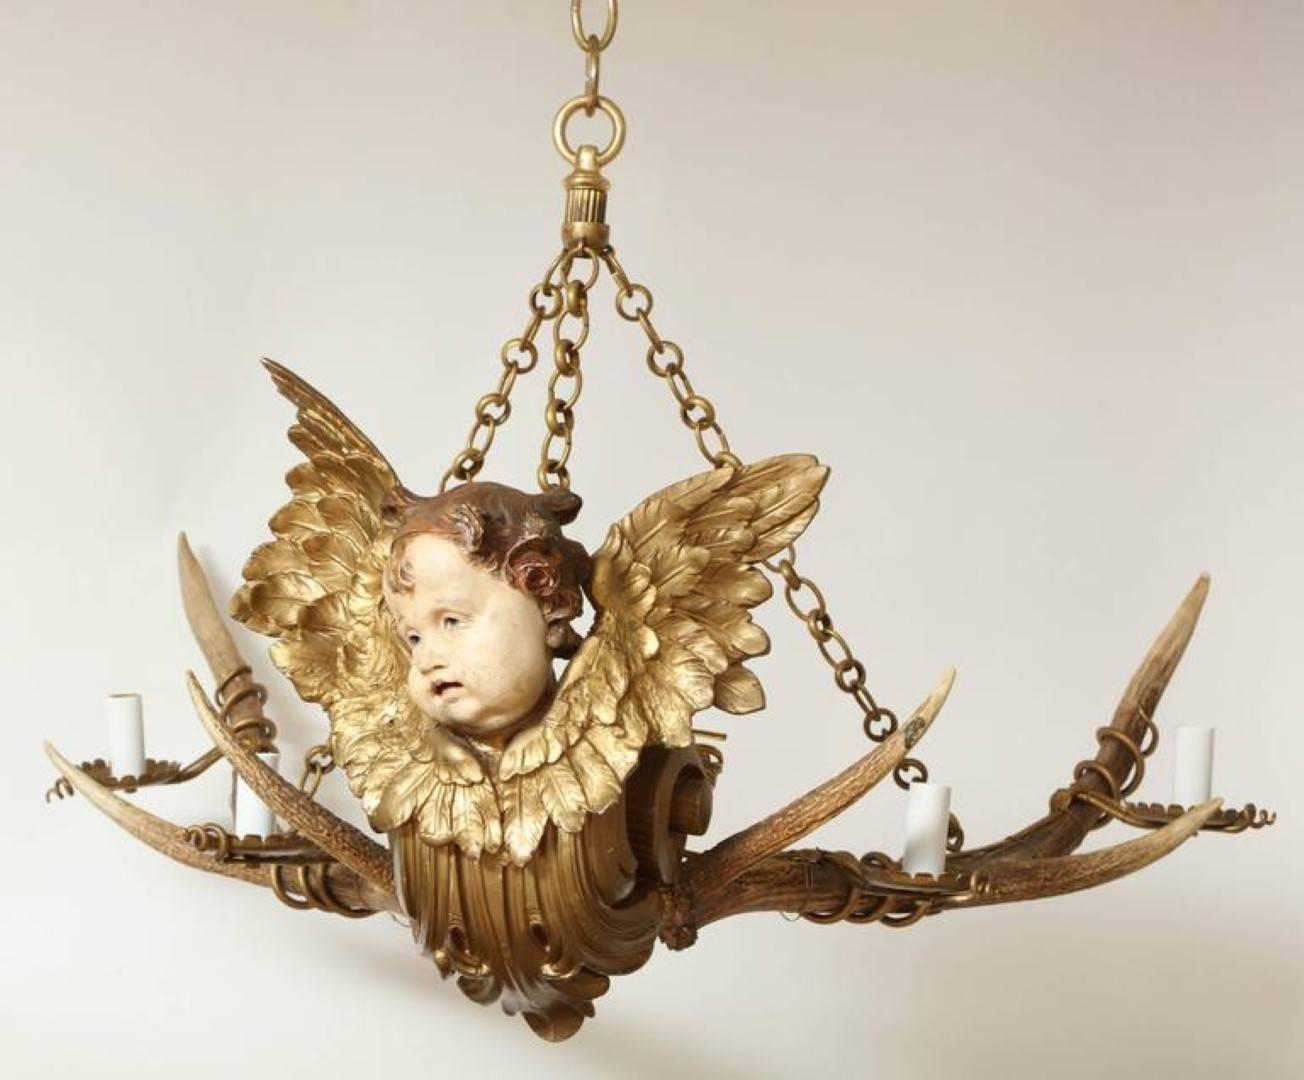 An Austrian four-light chandelier with a rack of natural deer antlers mounted with a carved wood figurative element of a winged cherub with fish scale body/tail. The natural antlers have iron tendrils encircling it and metal candle cups, now